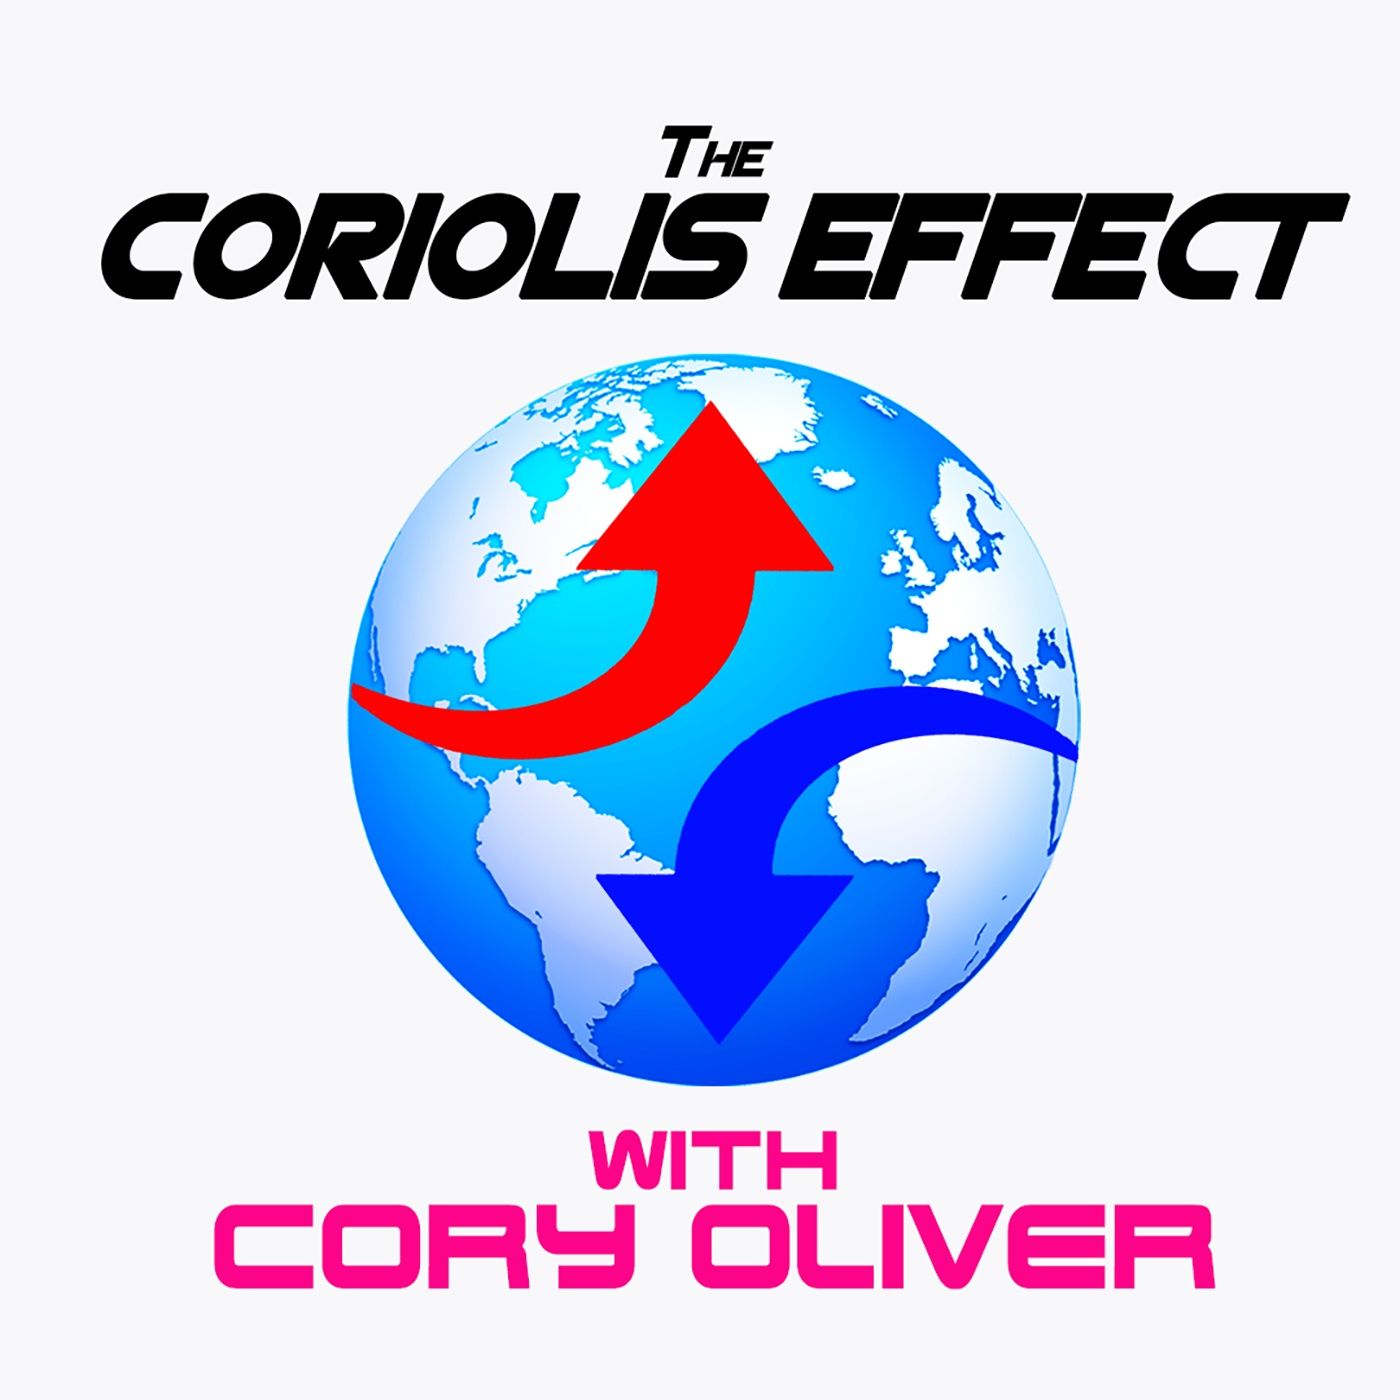 The Coriolis Effect with Cory Oliver